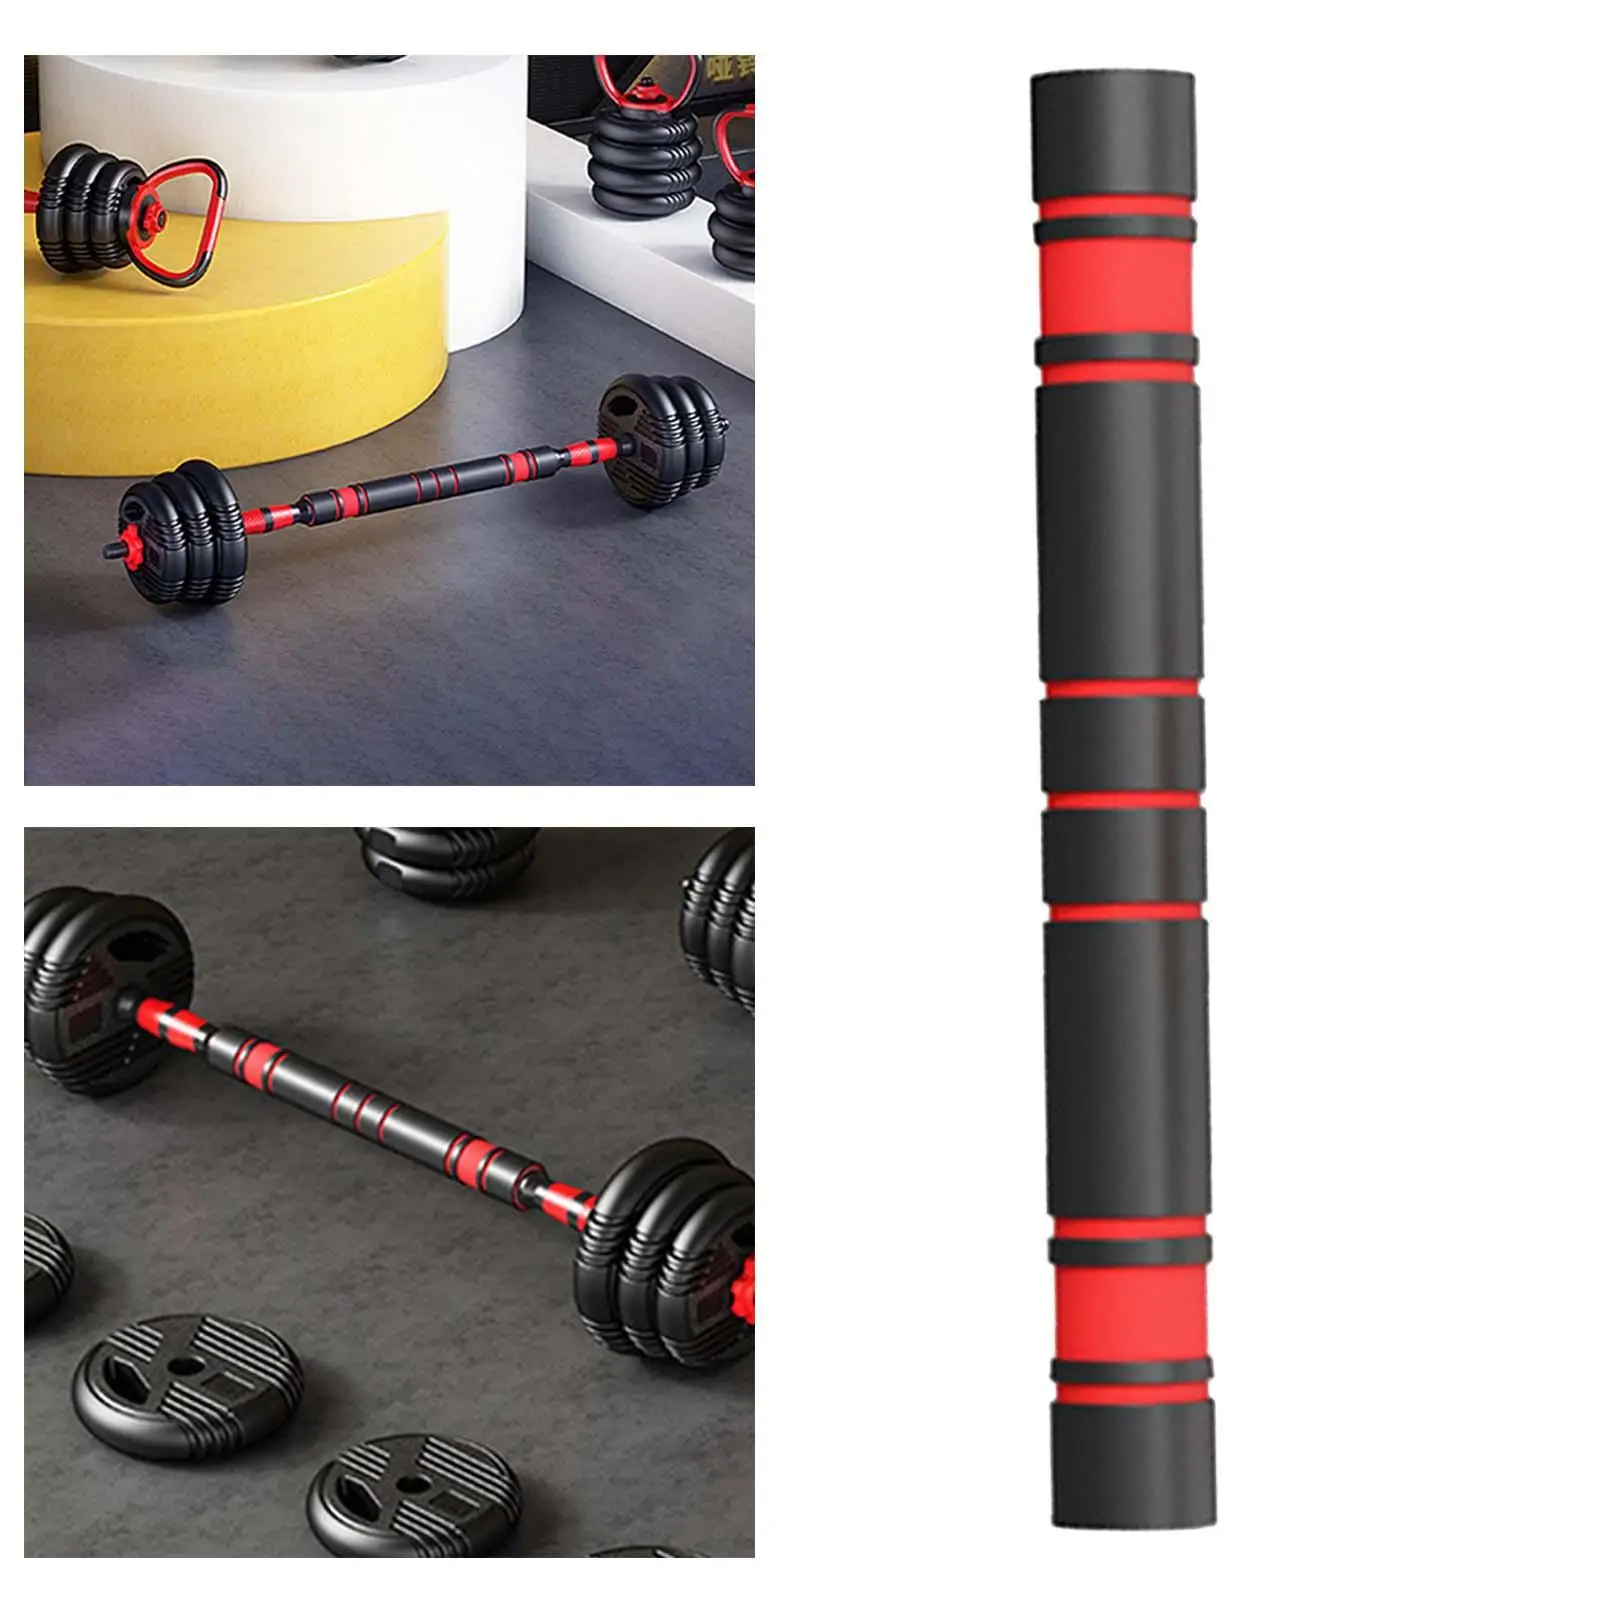 Dumbbell Connecting Rod Adapter Dumbbell Handle for Training Workout Gym